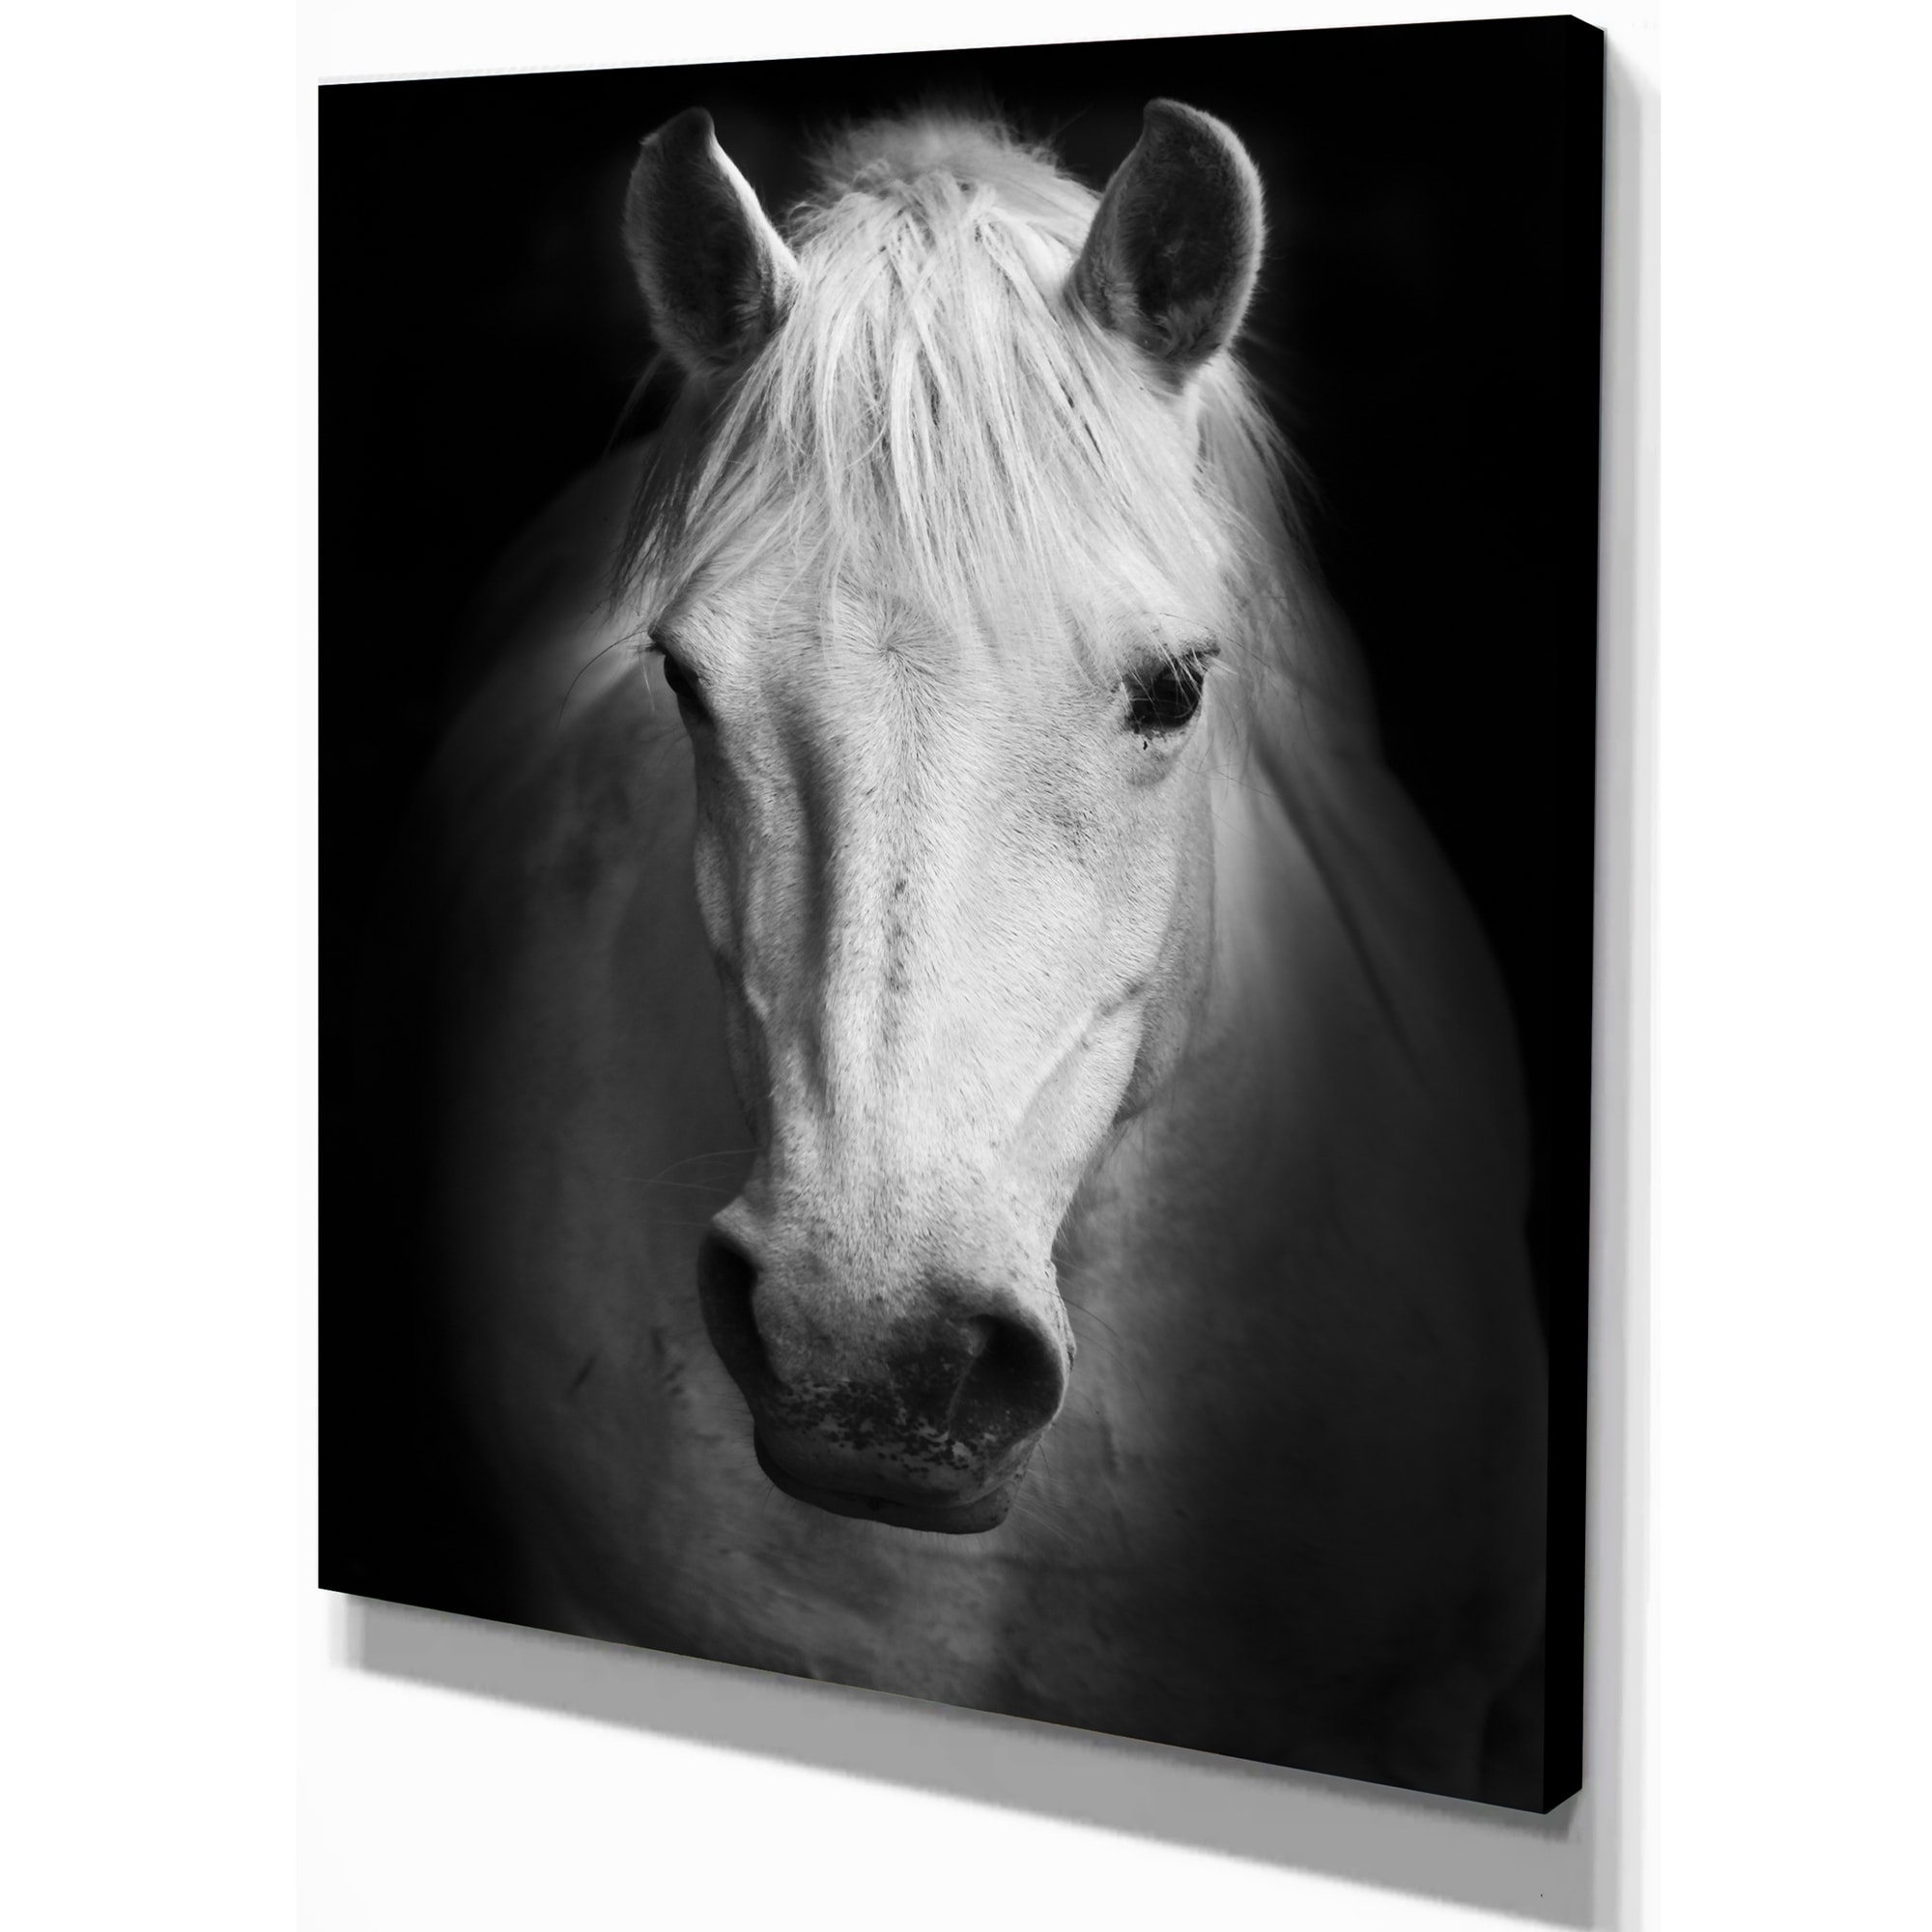 A646 Black White Geometric Horse Funky Animal Canvas Wall Art  Picture Prints